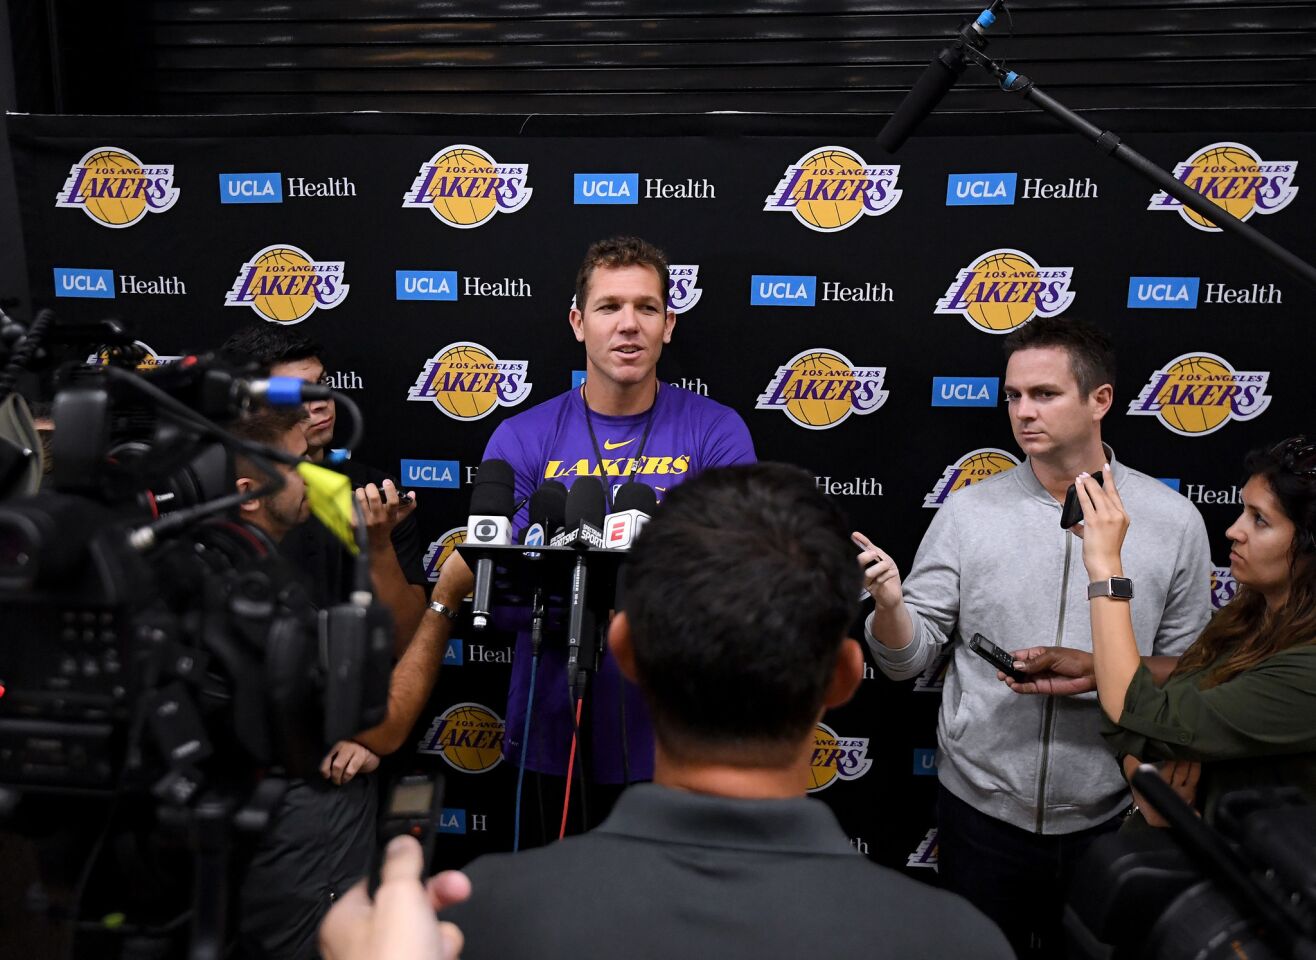 EL SEGUNDO, CA - SEPTEMBER 25: Head coach Luke Walton of the Los Angeles Lakers speaks to the press during a Los Angeles Lakers practice session at the UCLA Health Training Center on September 25, 2018 in El Segundo, California. (Photo by Harry How/Getty Images) ** OUTS - ELSENT, FPG, CM - OUTS * NM, PH, VA if sourced by CT, LA or MoD **